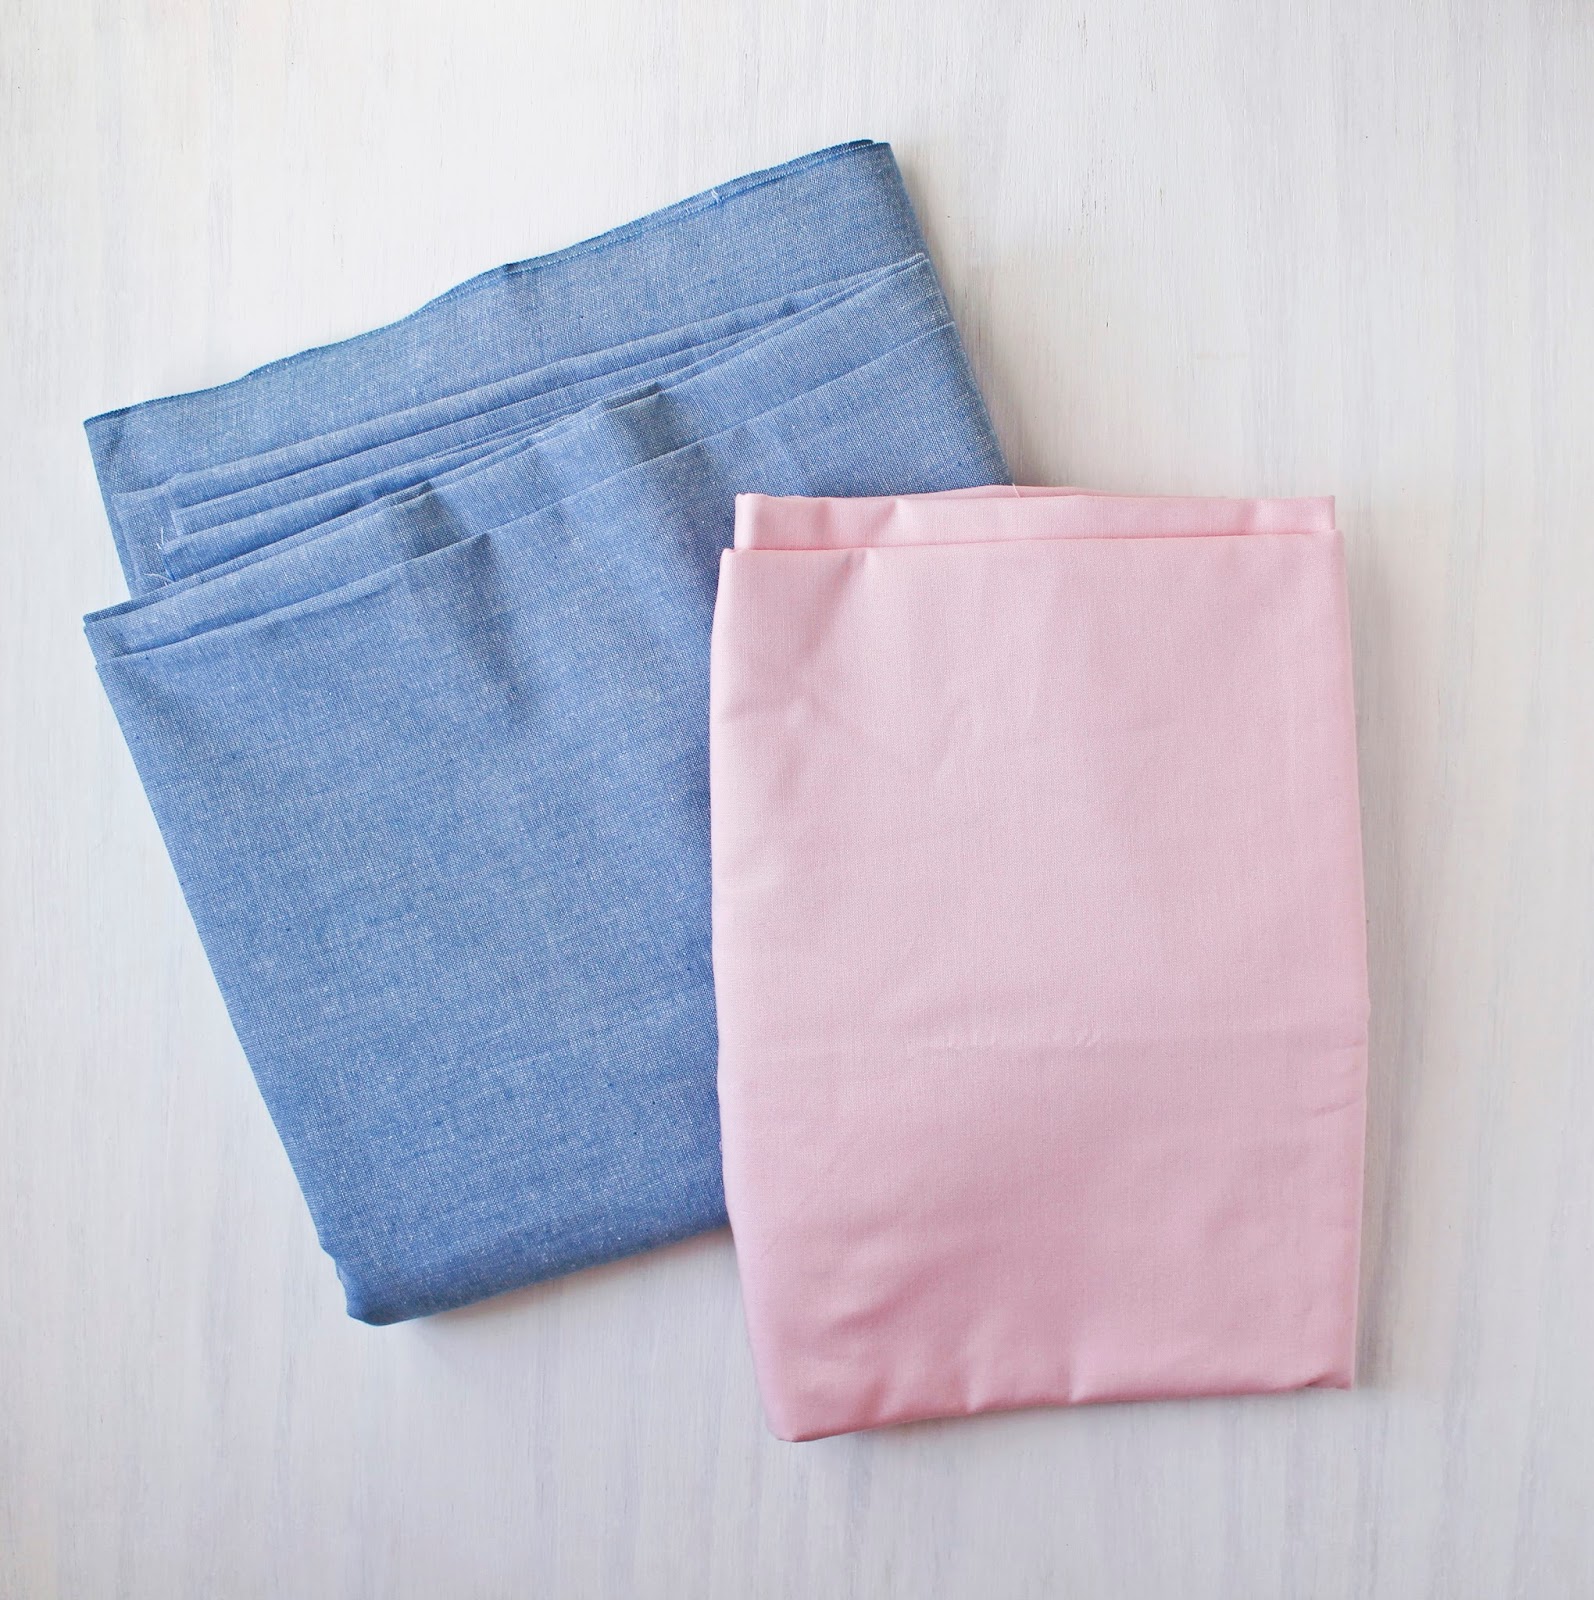 Chambray - A New Obsession by Bambino Amore - the Apron Makers